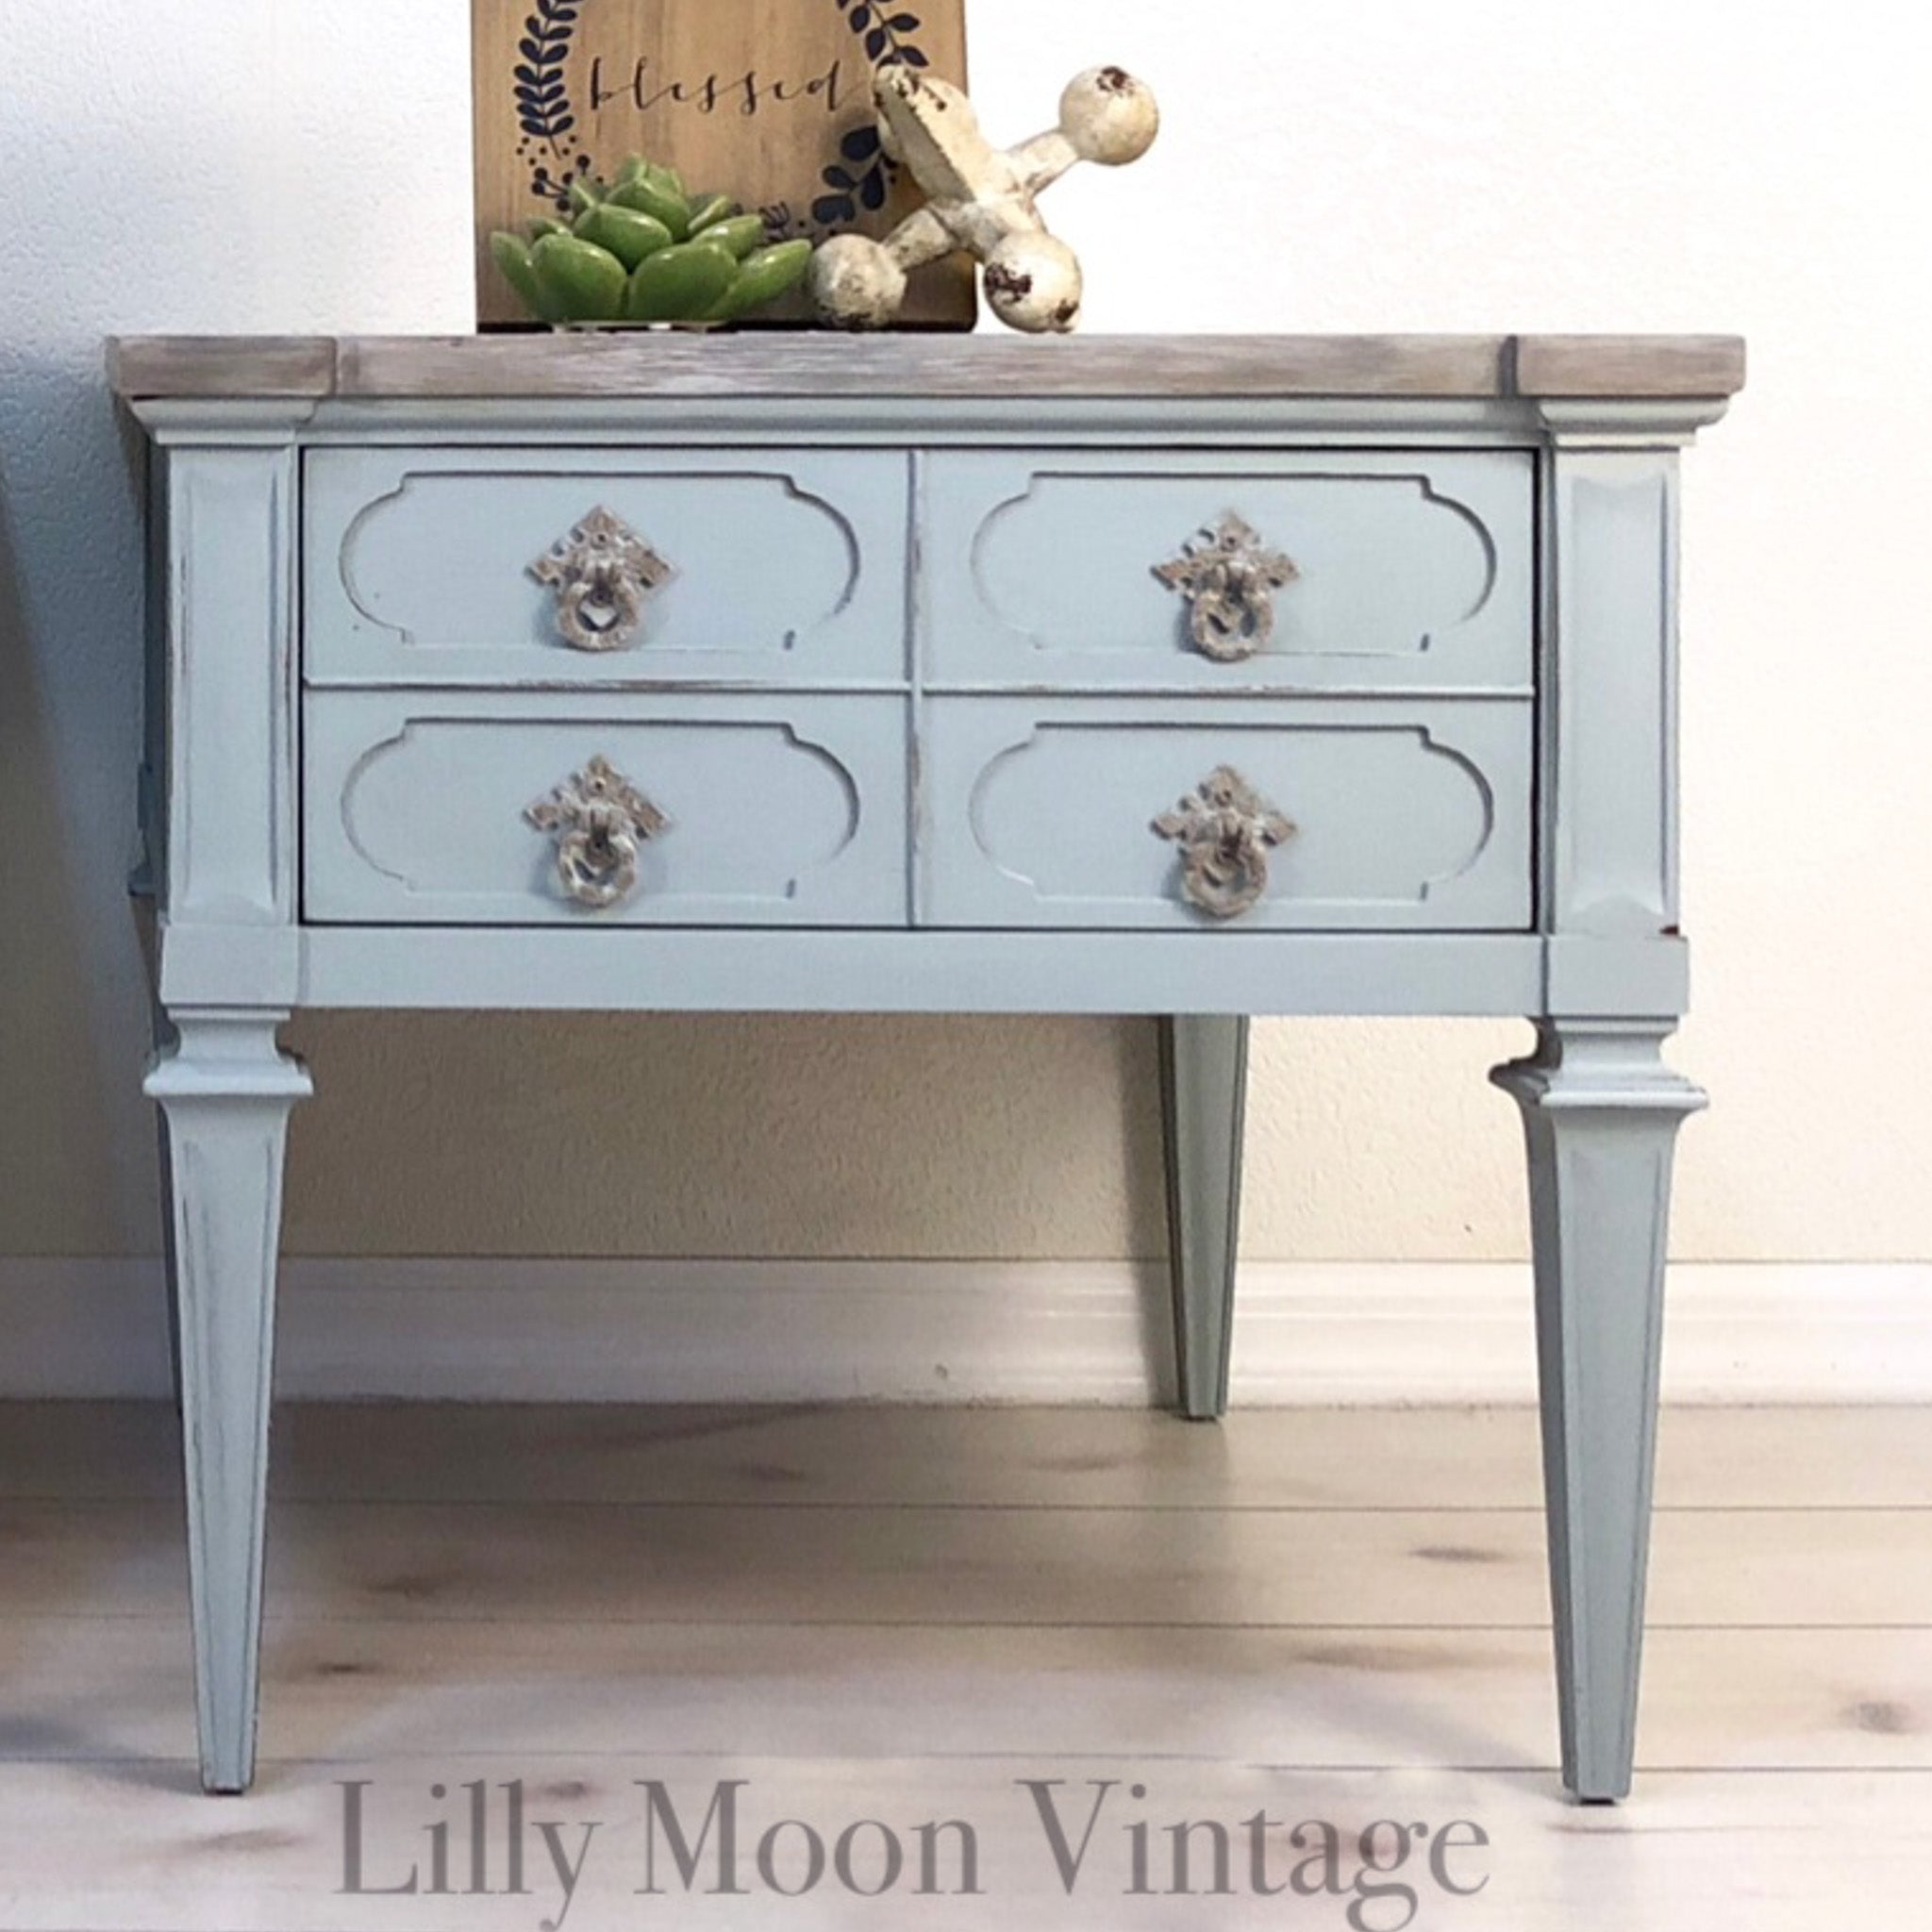 A vintage side table with 4 small drawers refurbished by Lilly Moon Vintage is painted in Dixie Belle's Savannah Mist chalk mineral paint.